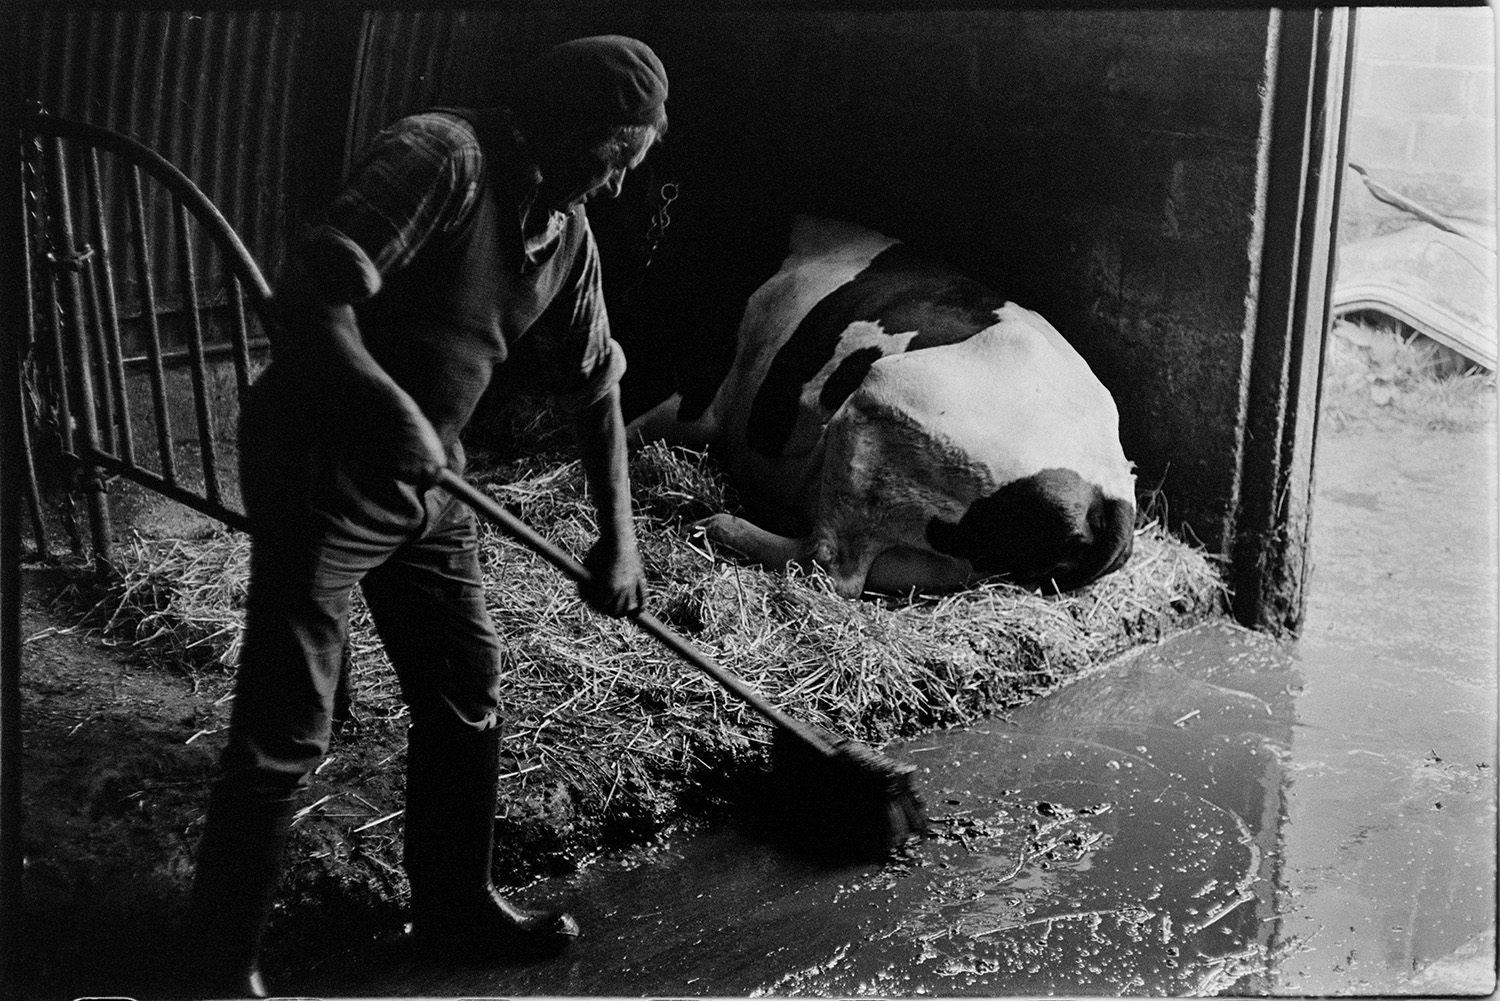 Farmer washing out milking parlour after milking and taking muck out in wheelbarrow. 
[William Medland brushing down the milking parlour at Hallcourt, Petrockstowe with a broom. A cow is laid down on a straw bed in the background.]